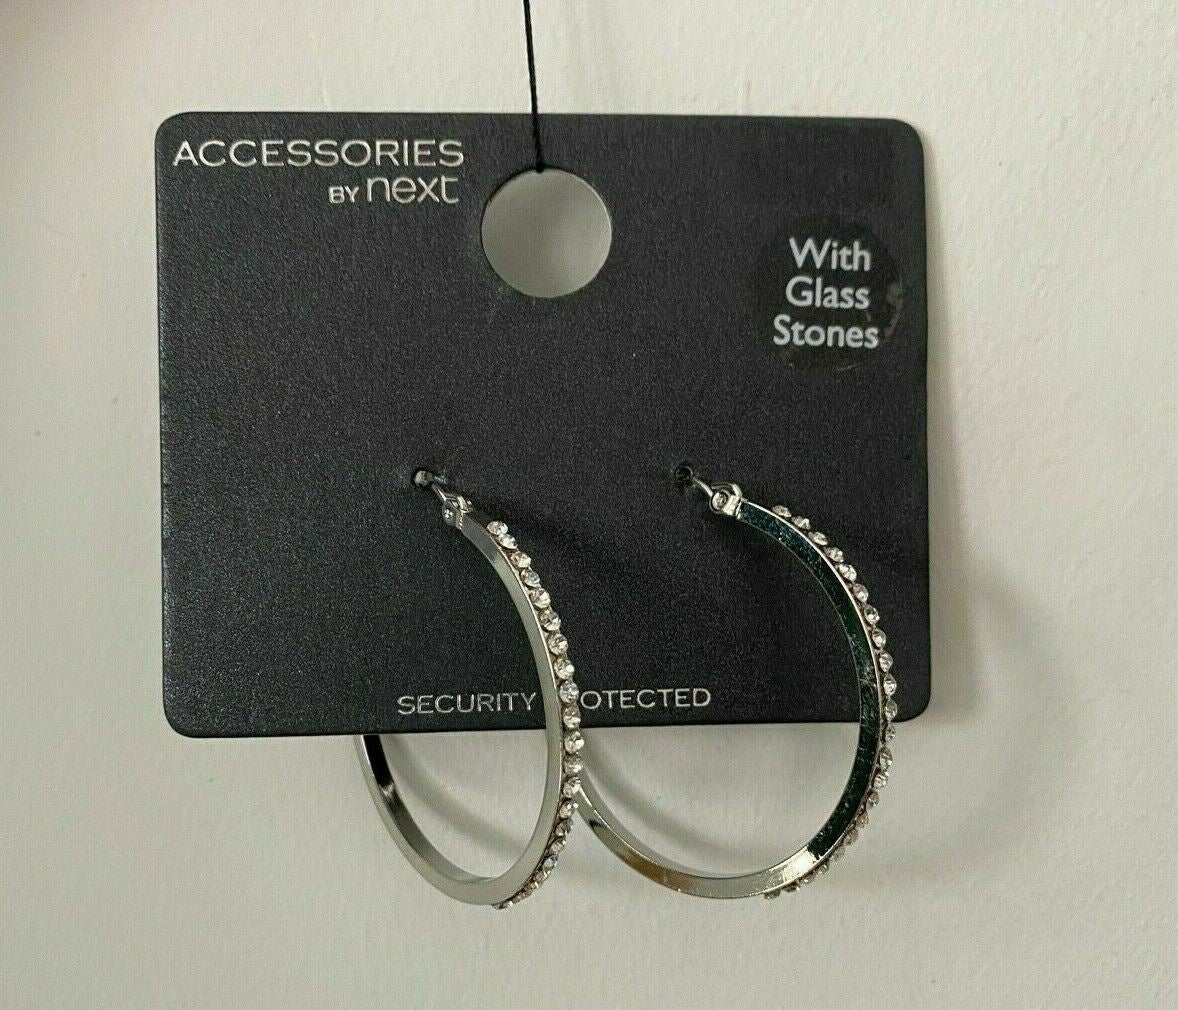 Accessories by Next Silver Plated Hoop Earrings With Glass Stones